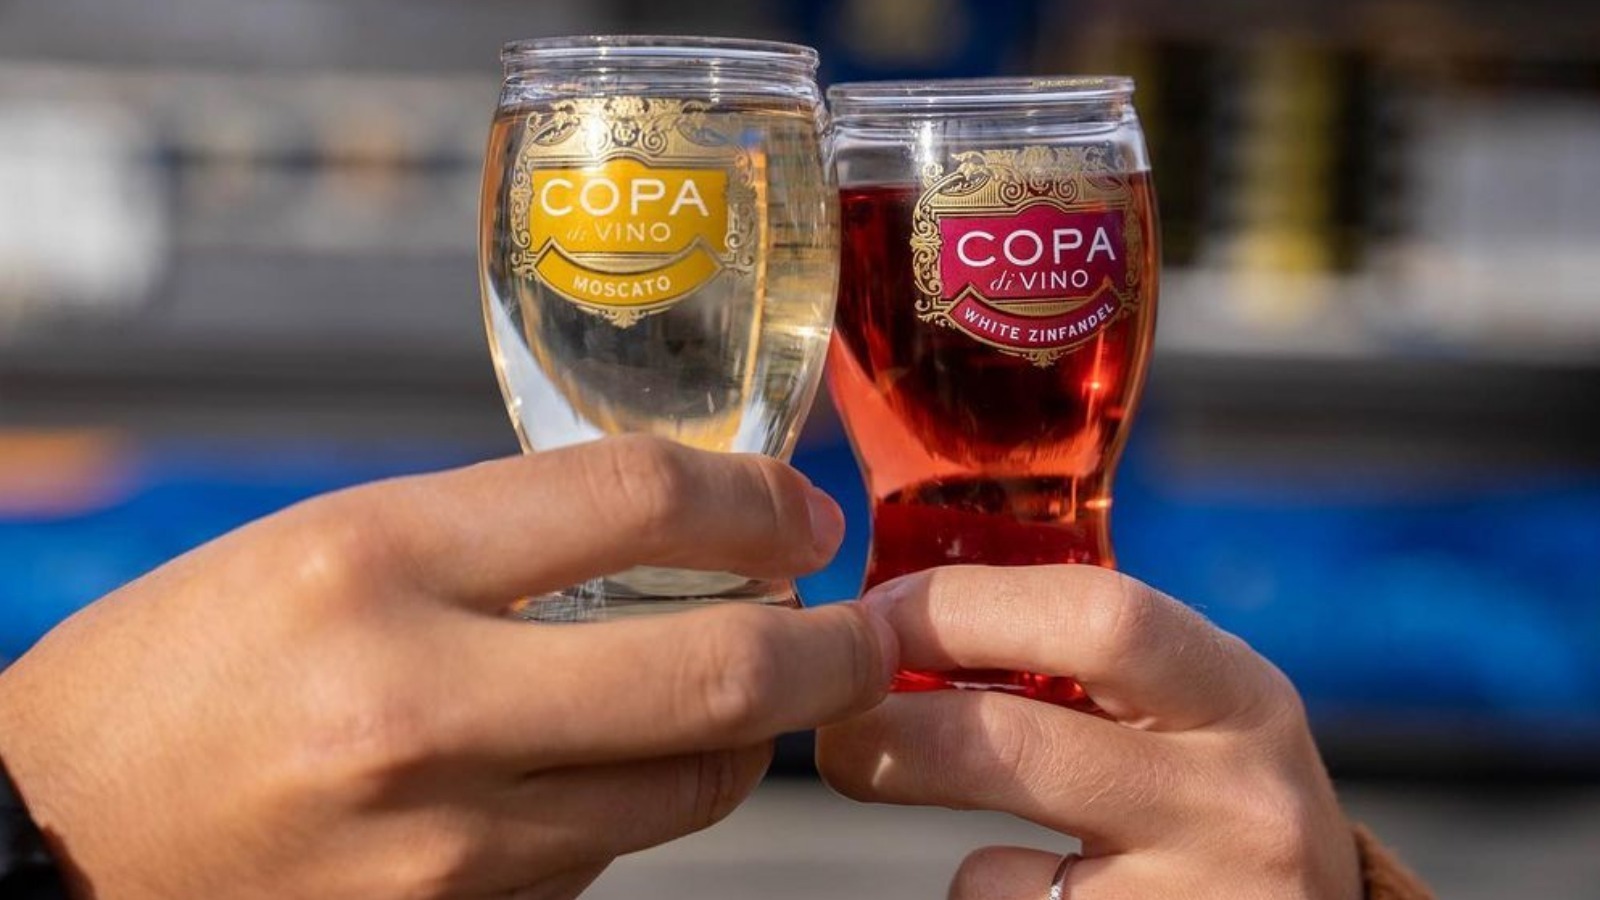 What Happened To Copa Di Vino After Shark Tank?